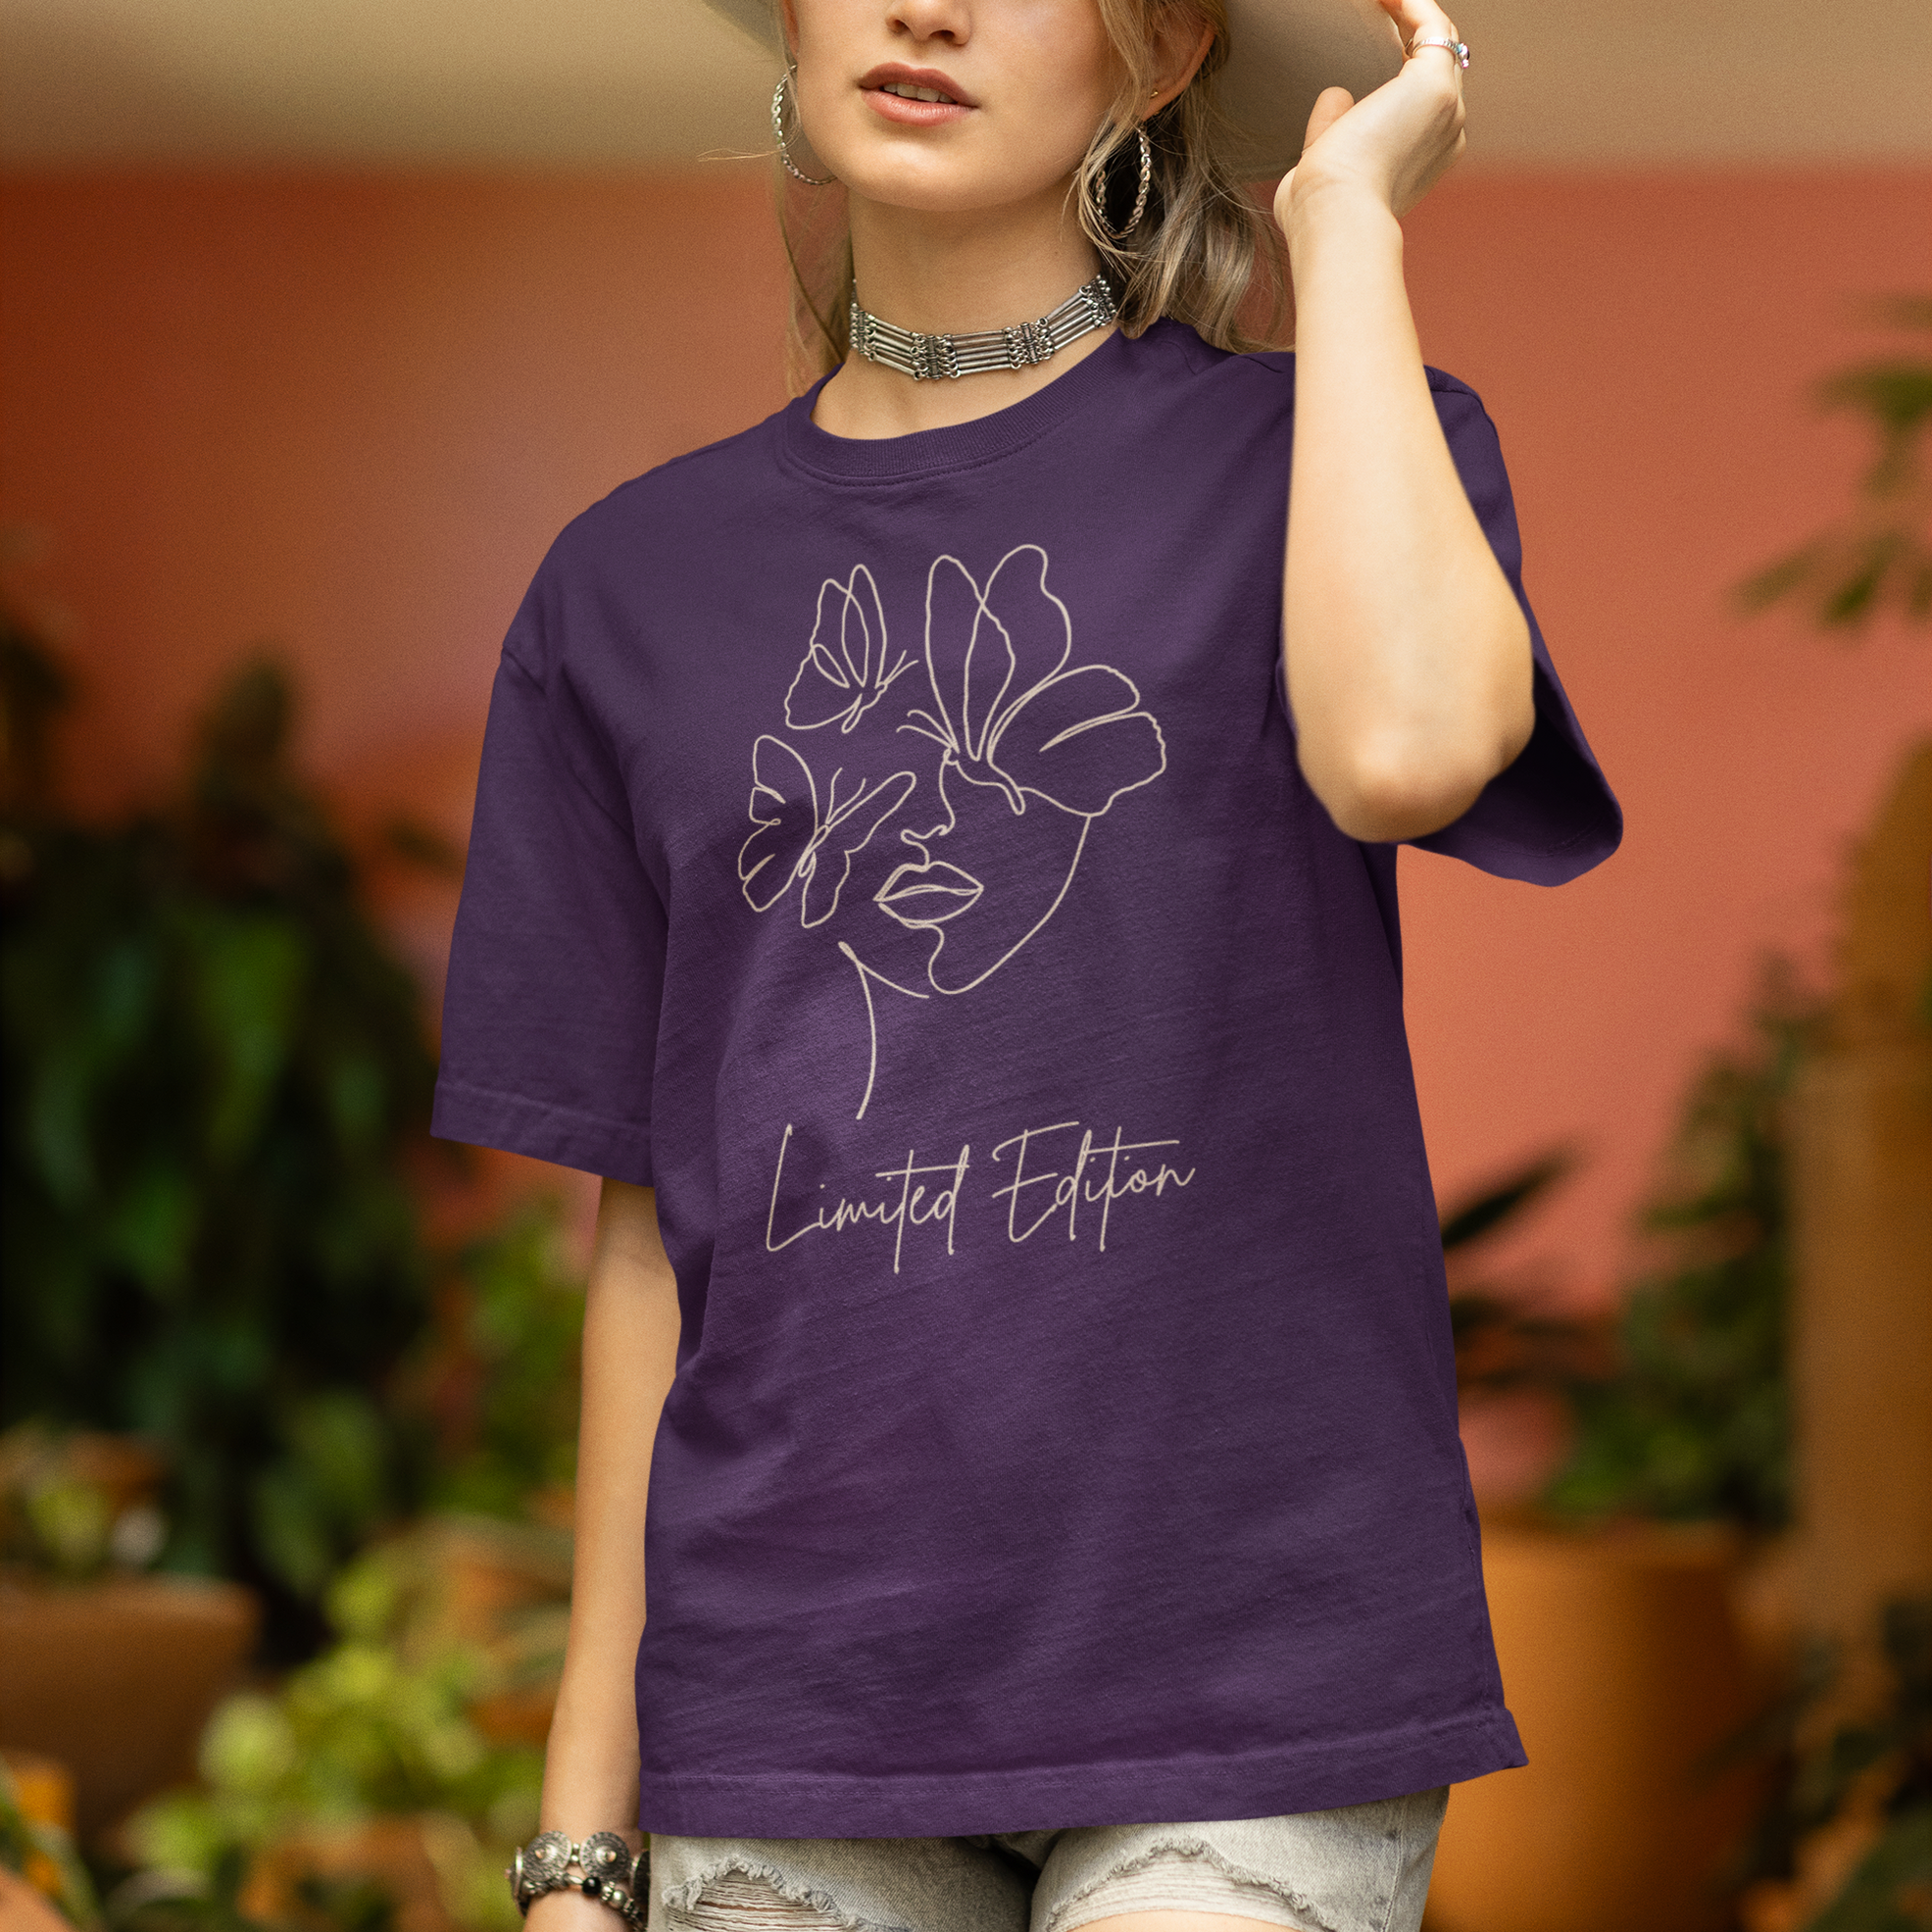 Women's 'Limited Edition' Cotton Oversized Tee with Minimalistic Woman Outline Design